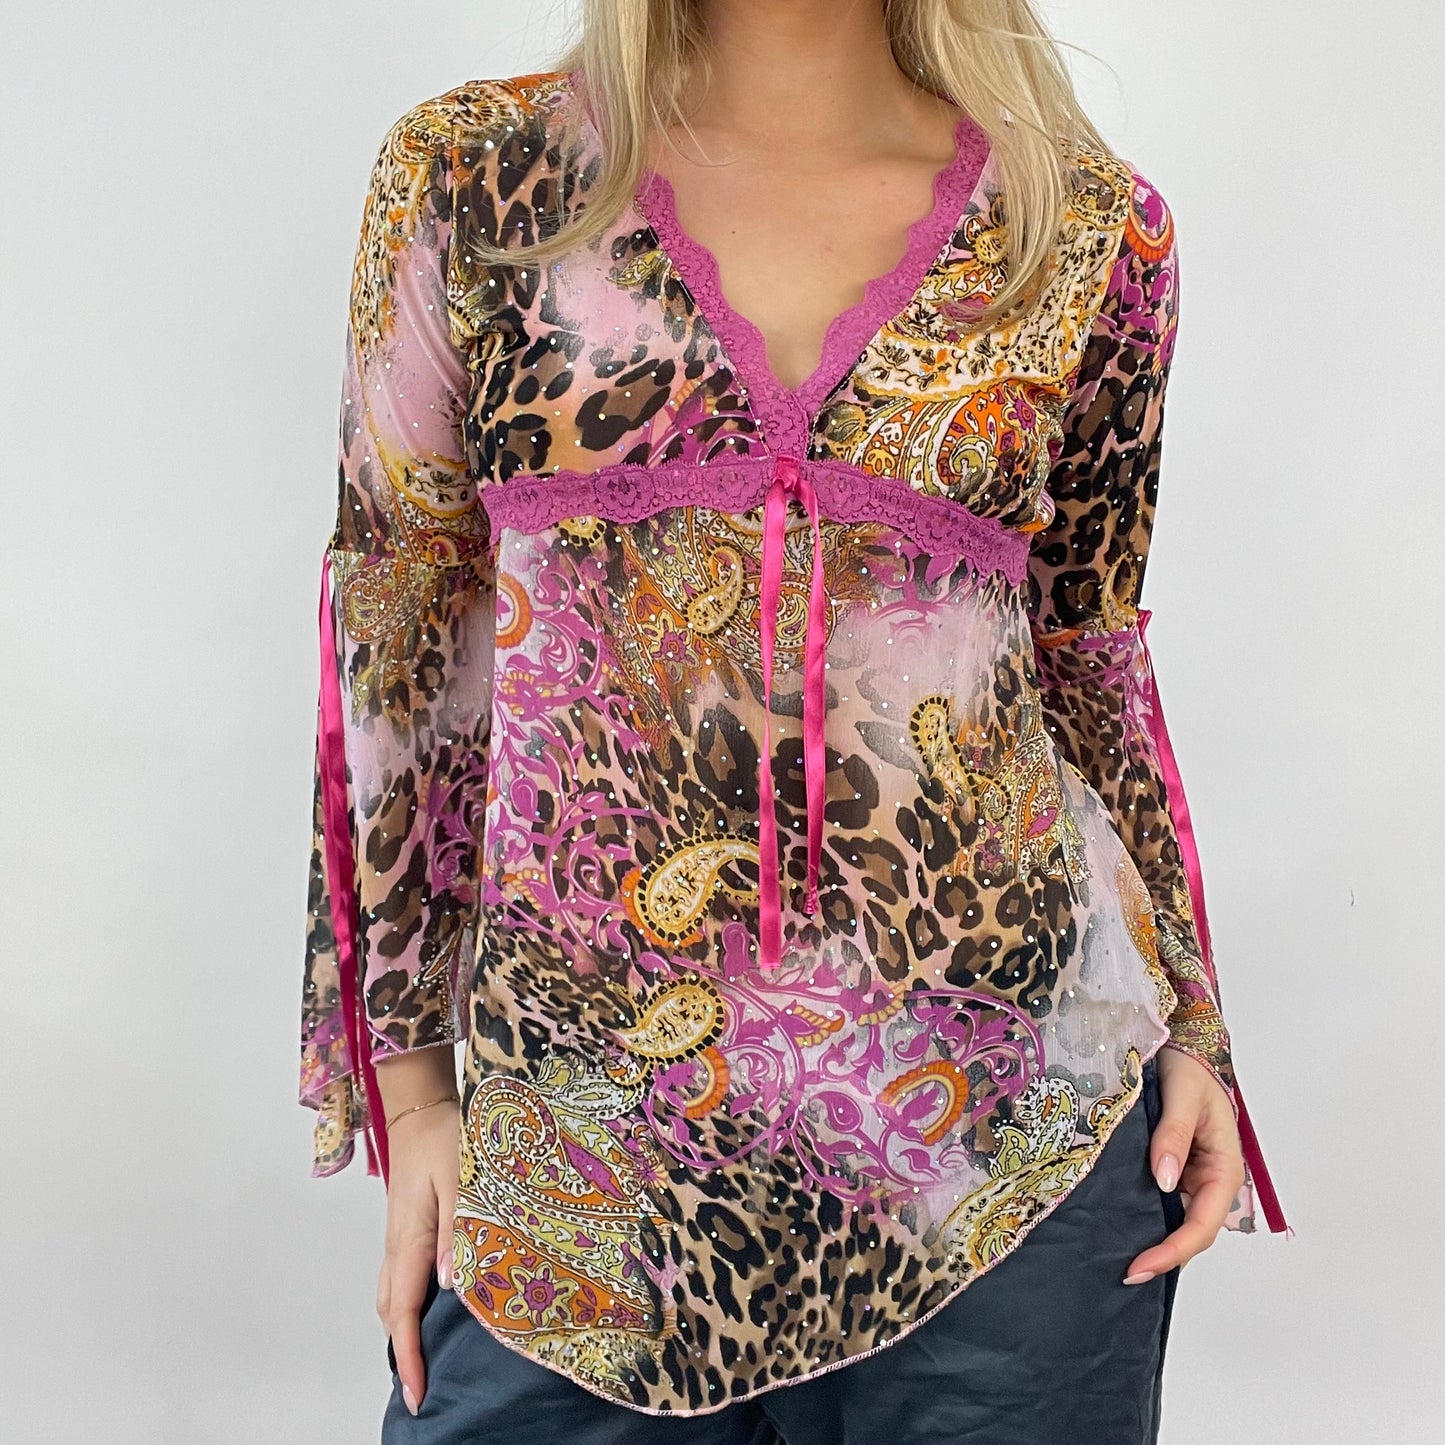 💻 GIRL CORE DROP | medium pink leopard print floaty long sleeve top with lace trim